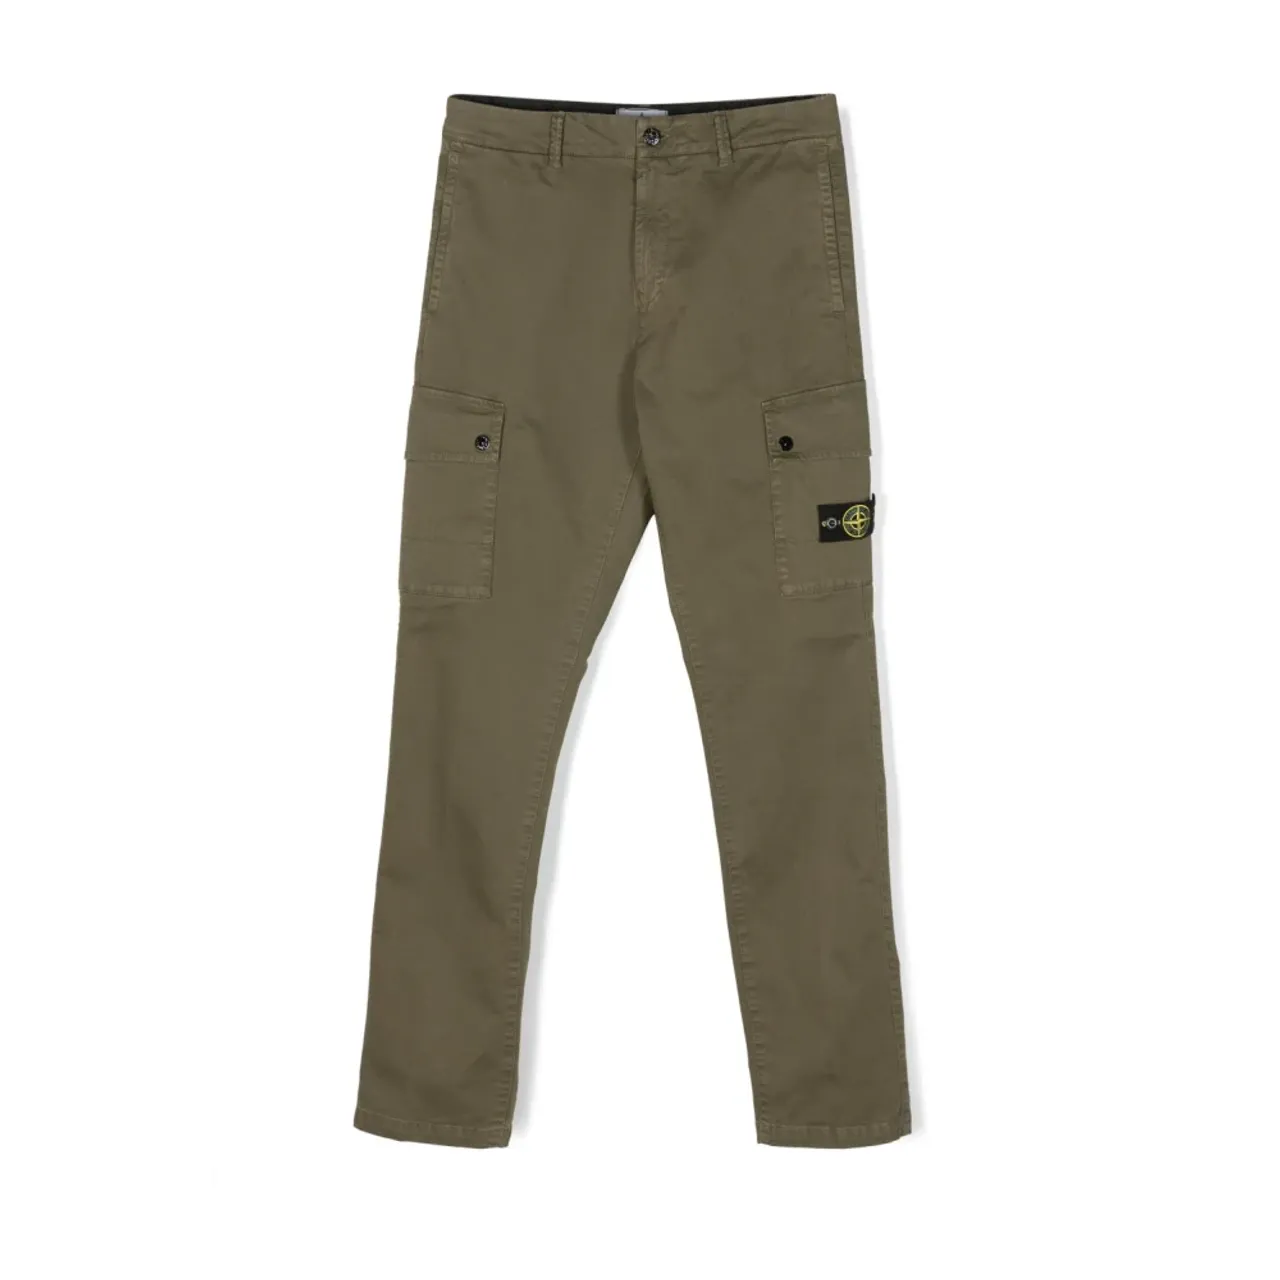 Stone Island , Kids Green Trousers with Comp Motif ,Green male, Sizes: